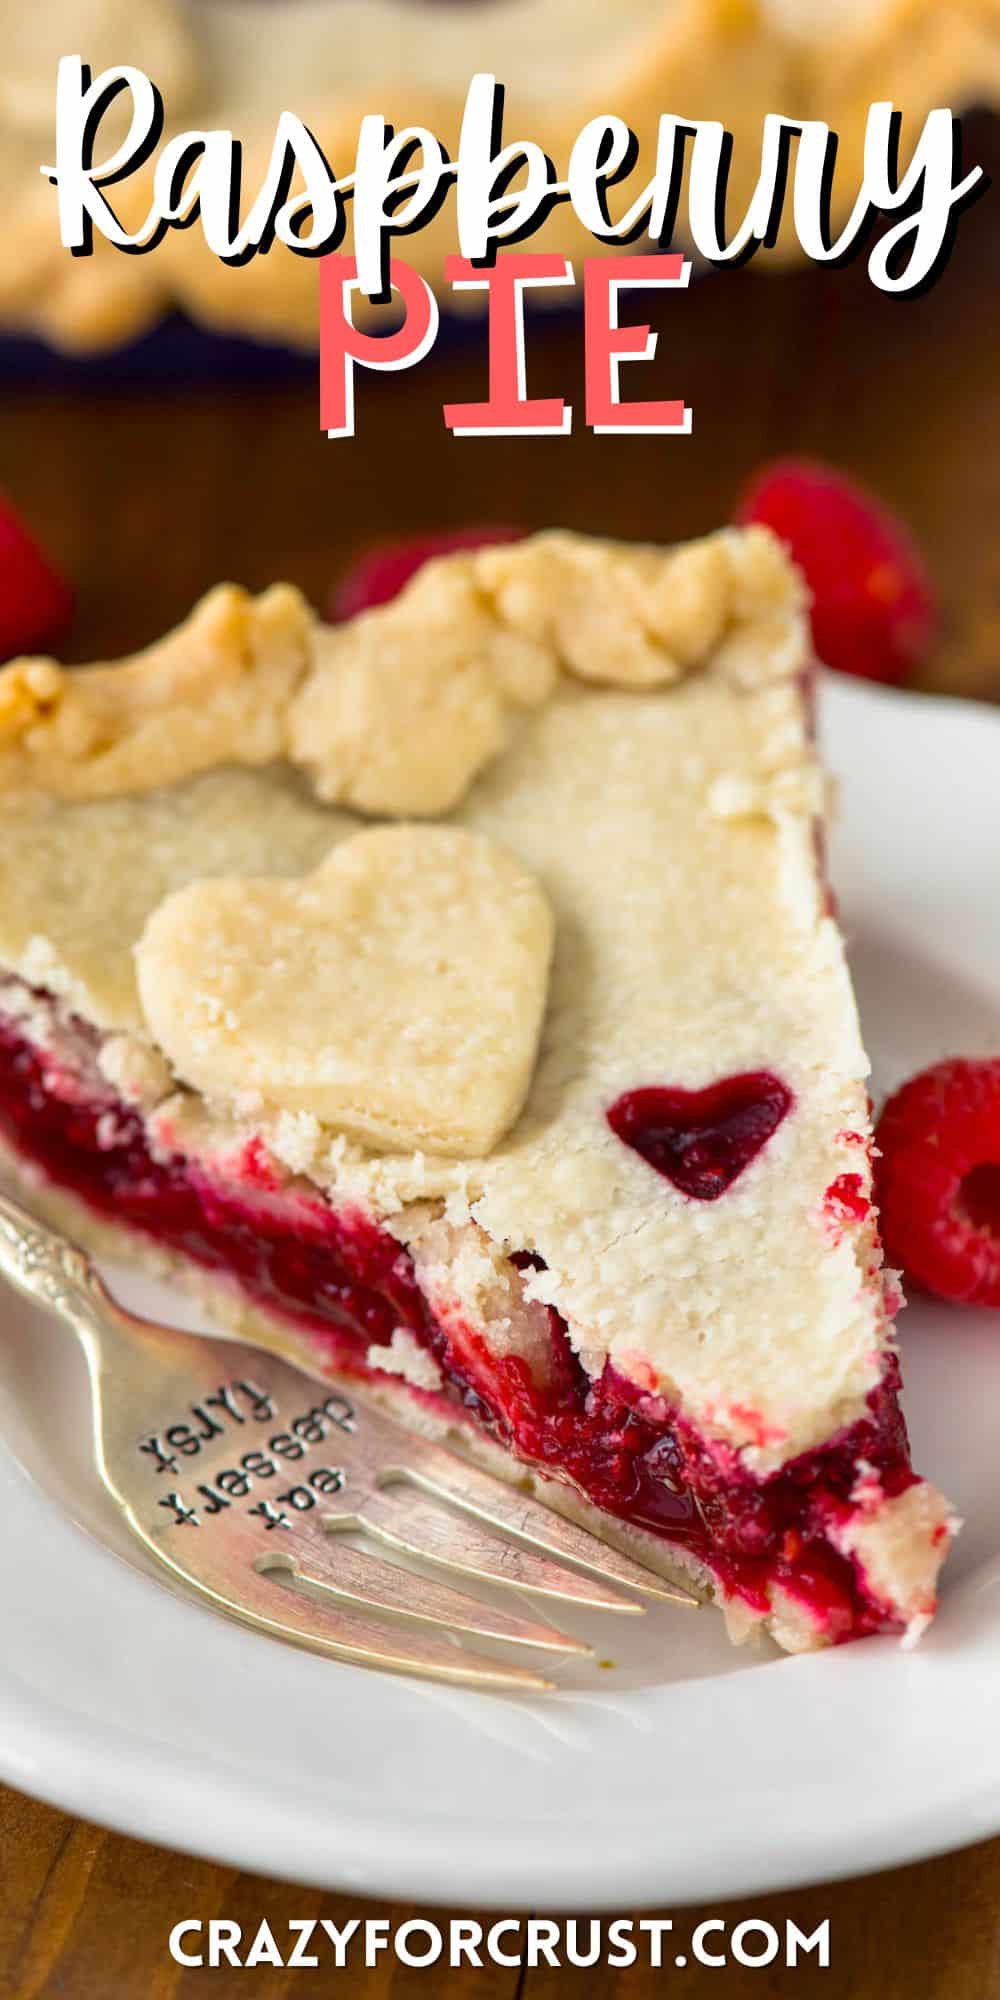 one slice of pie with raspberry filling and a heart sliced out of the dough with words on the image.